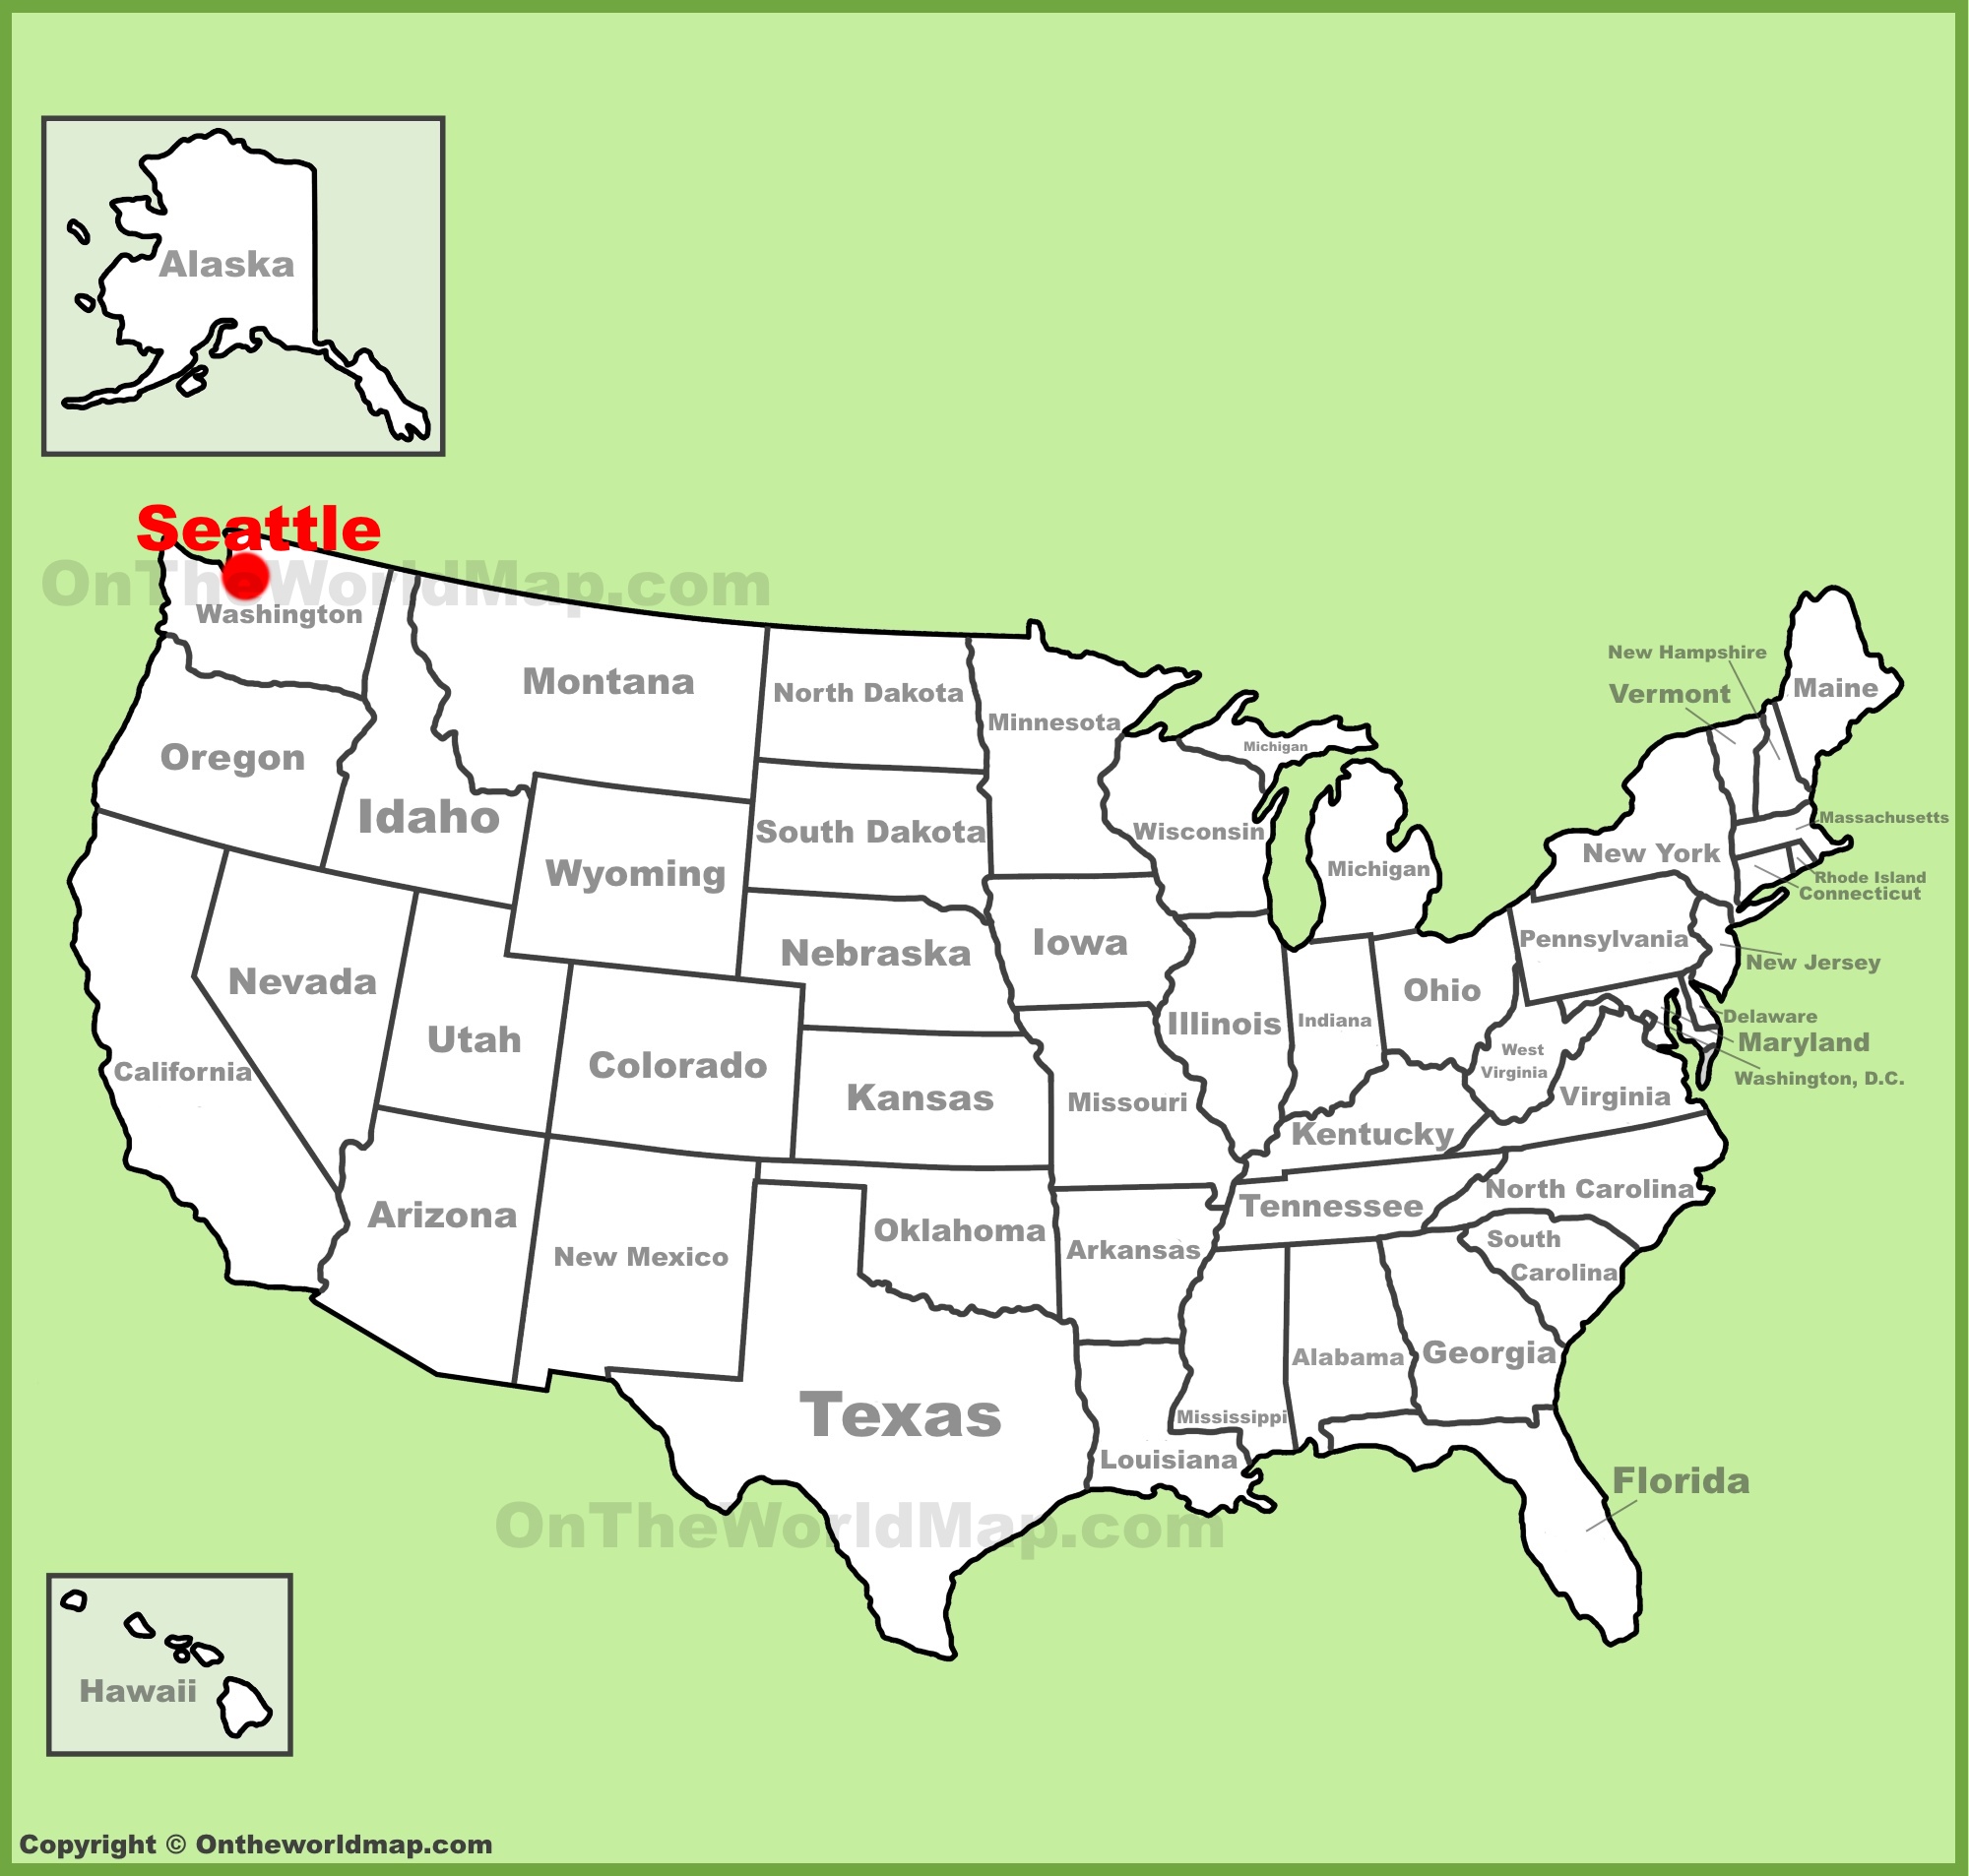 Seattle Location On The Us Map 